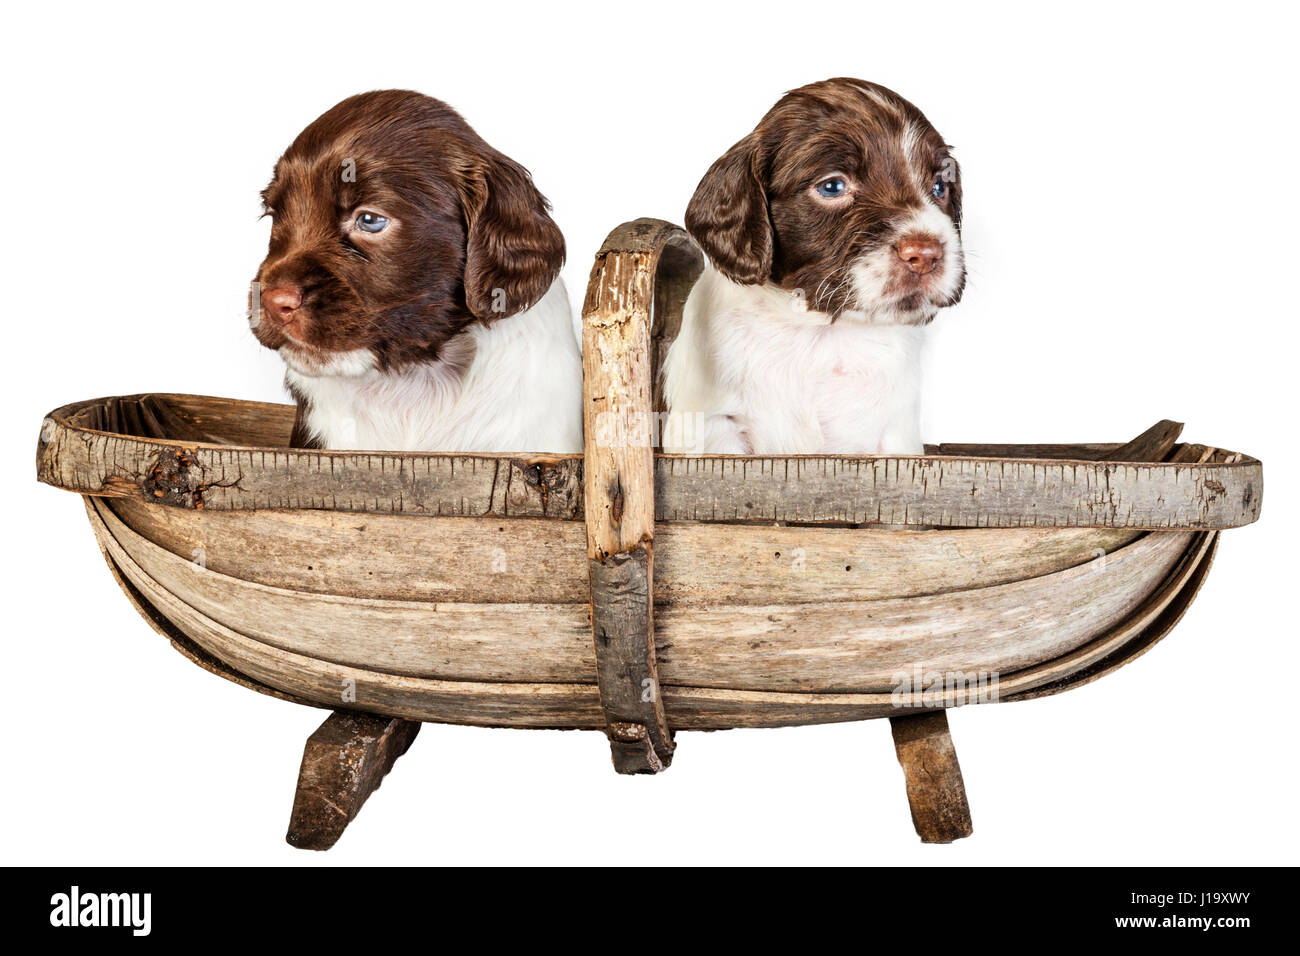 Two 4 week old liver and white English Springer Spaniel puppys in a trug Stock Photo